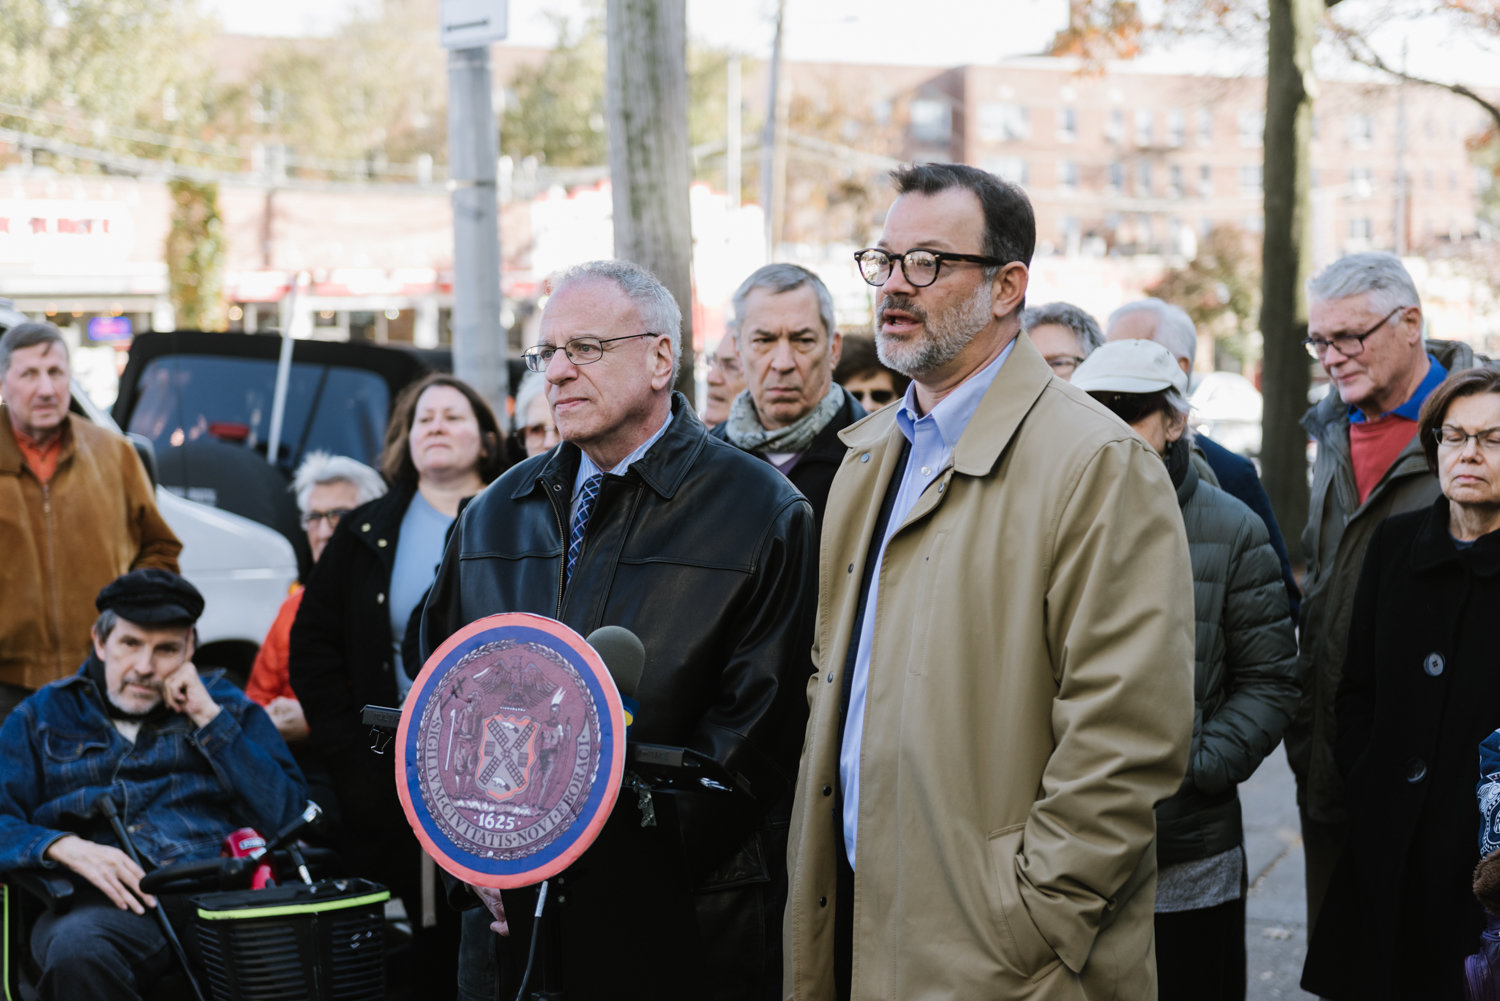 Assemblyman Jeffrey Dinowitz and Councilman Andrew Cohen speak against Montefiore Medical Center’s reported plan to revive efforts to build a 10-story health care facility on the empty lot south of the intersection of West 238th Street and Riverdale Avenue.